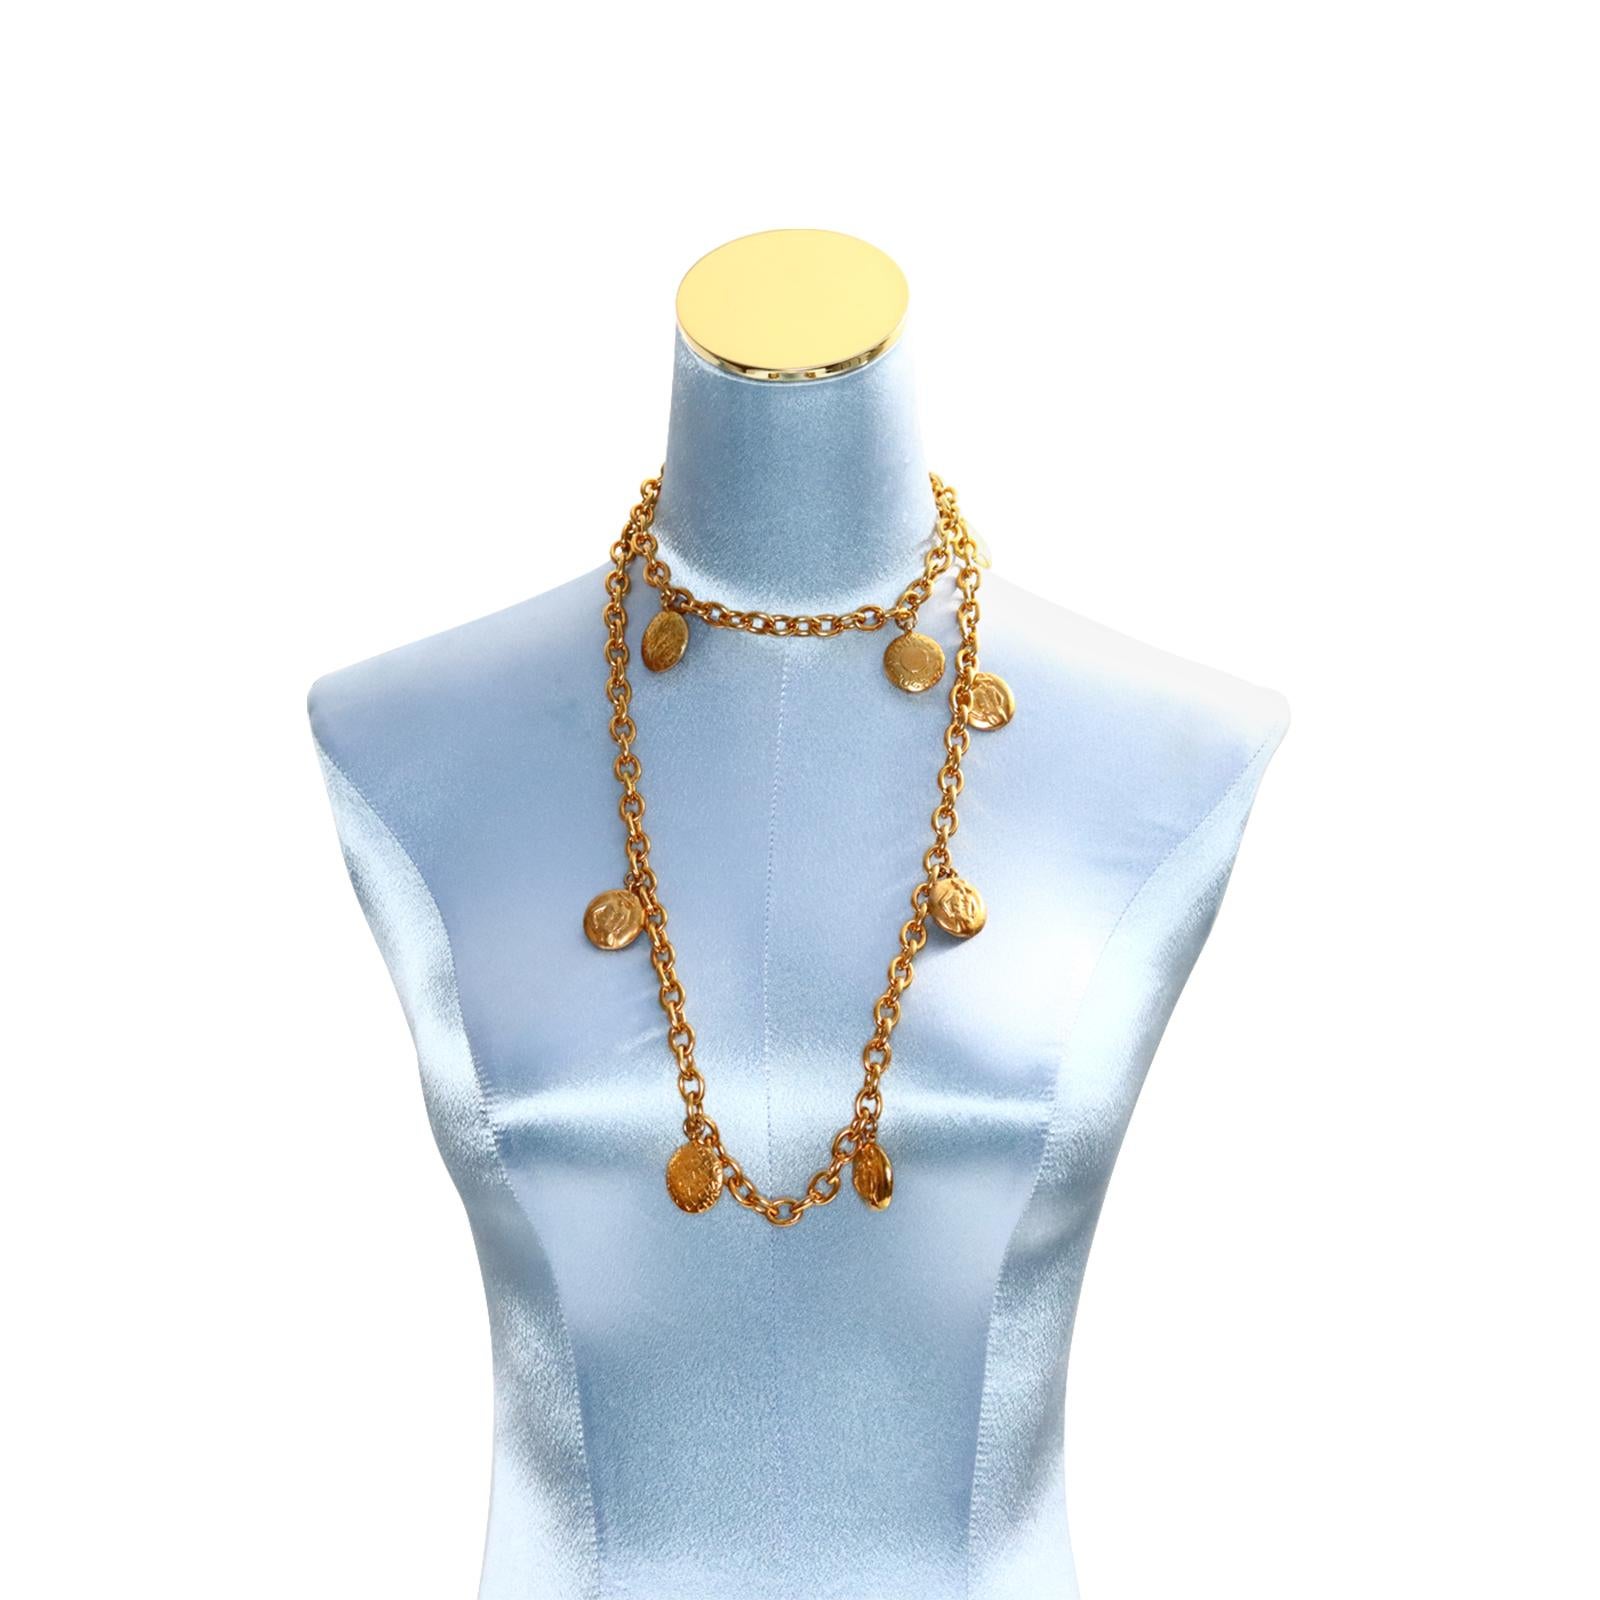 Vintage Chanel Gold Disc Chanel and Coco on Long Necklace Circa 1980s For Sale 3